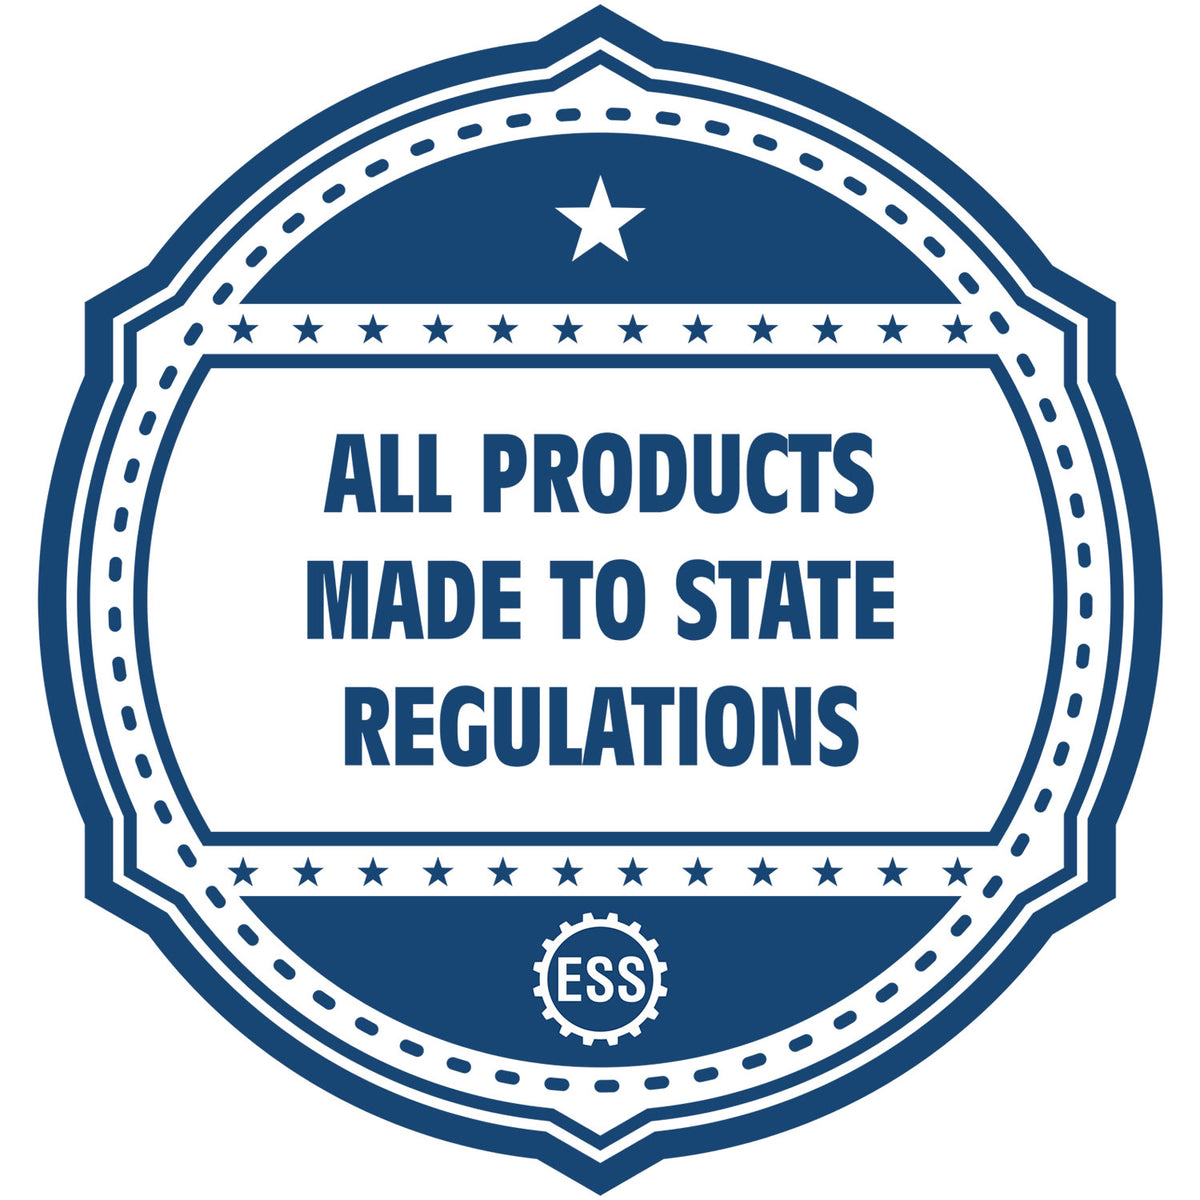 An icon or badge element for the Self-Inking State Seal Minnesota Notary Stamp showing that this product is made in compliance with state regulations.